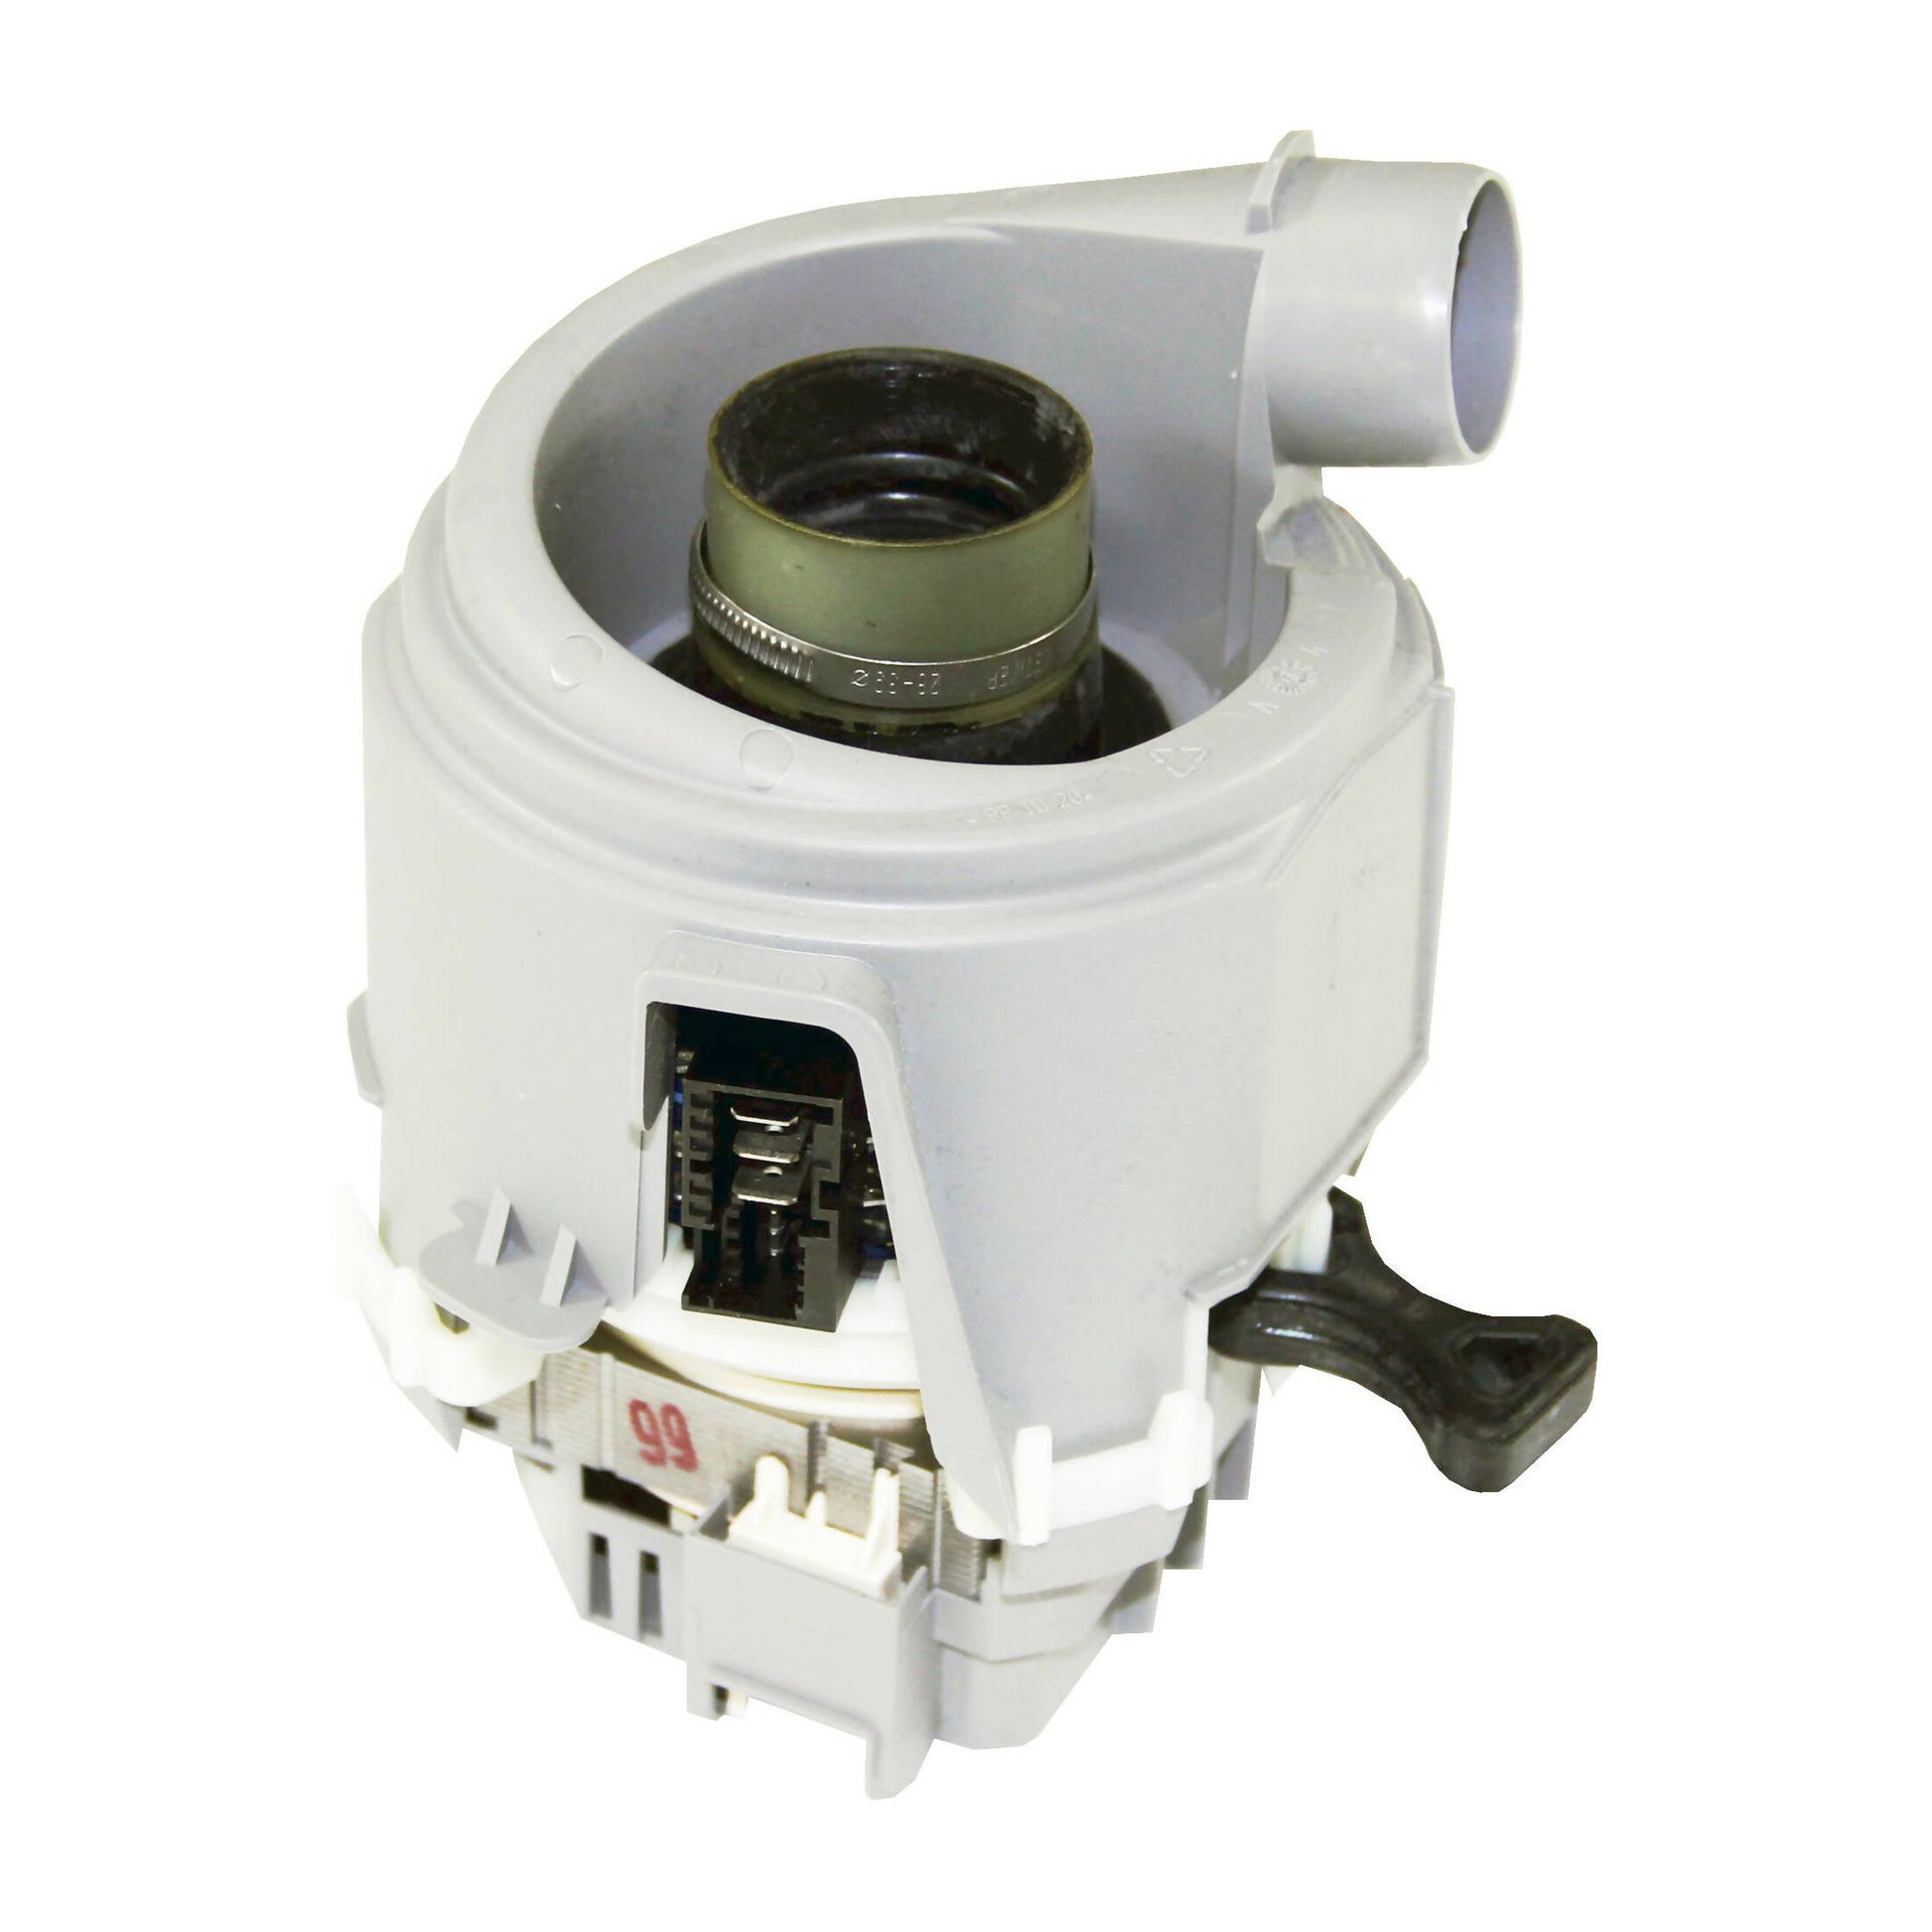 Bosch Dishwasher Circulation Pump & Heater - 00753351, Replaces: PD00037208 00746094 746094 753351 OEM PARTS WORLD